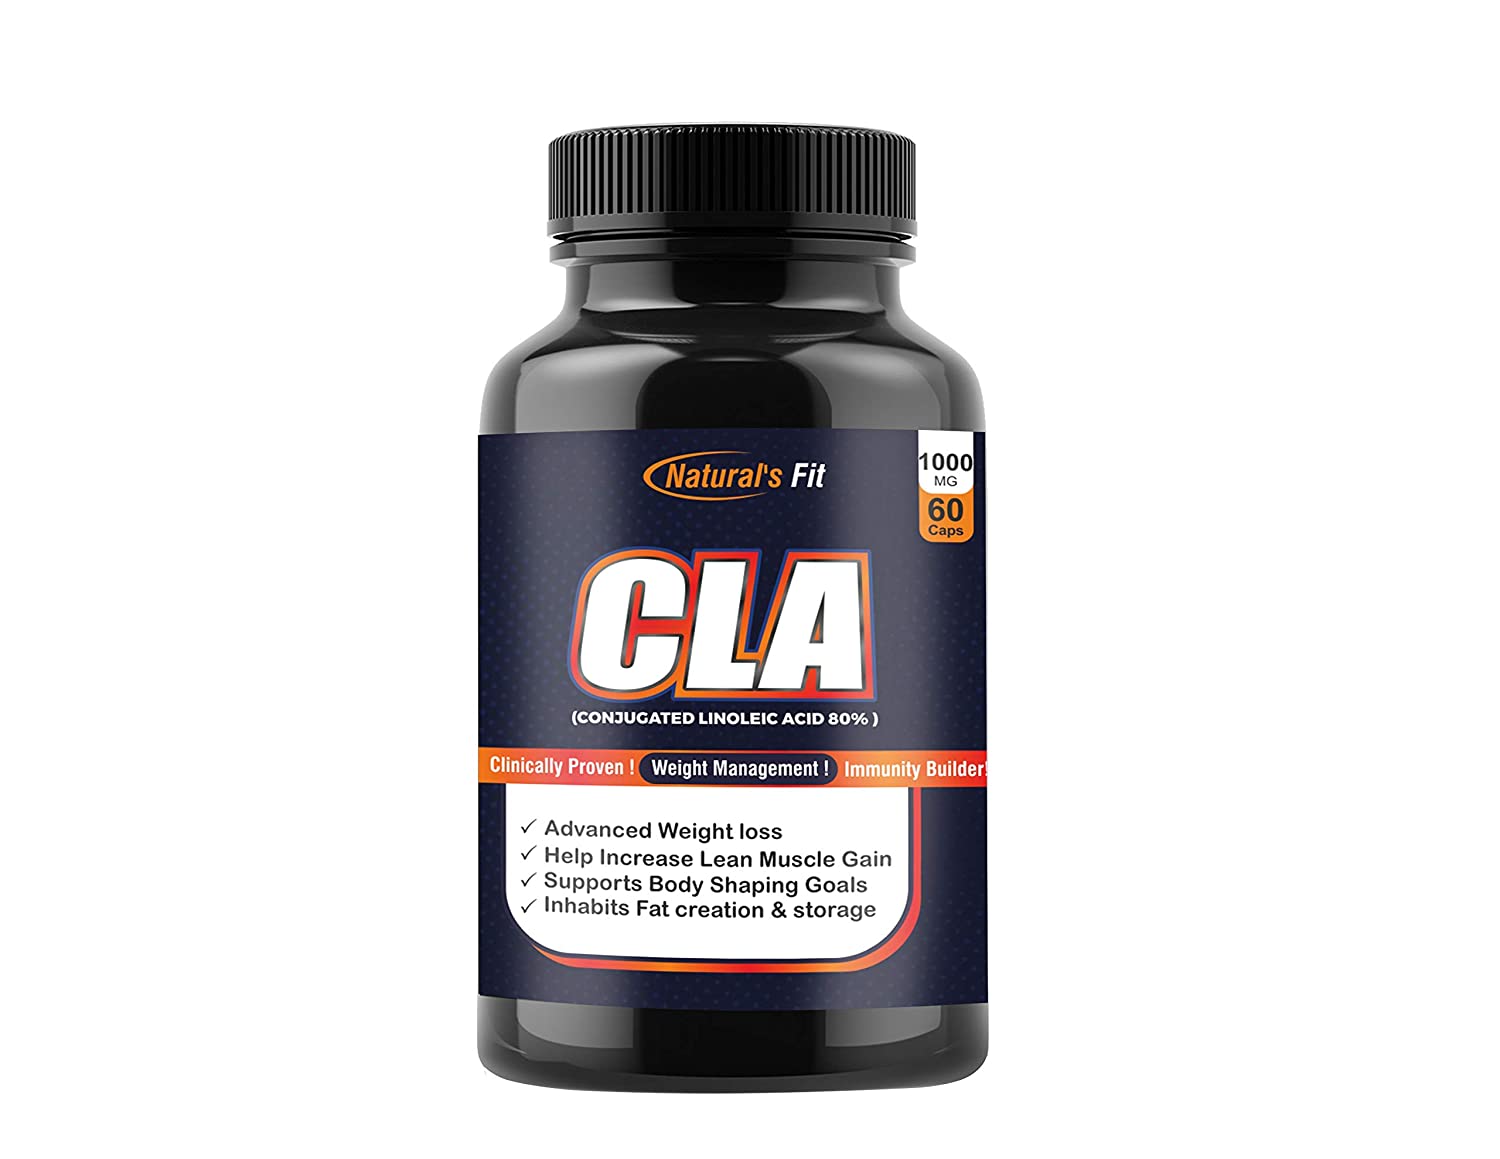 Natural's Fit CLA Supplement Image